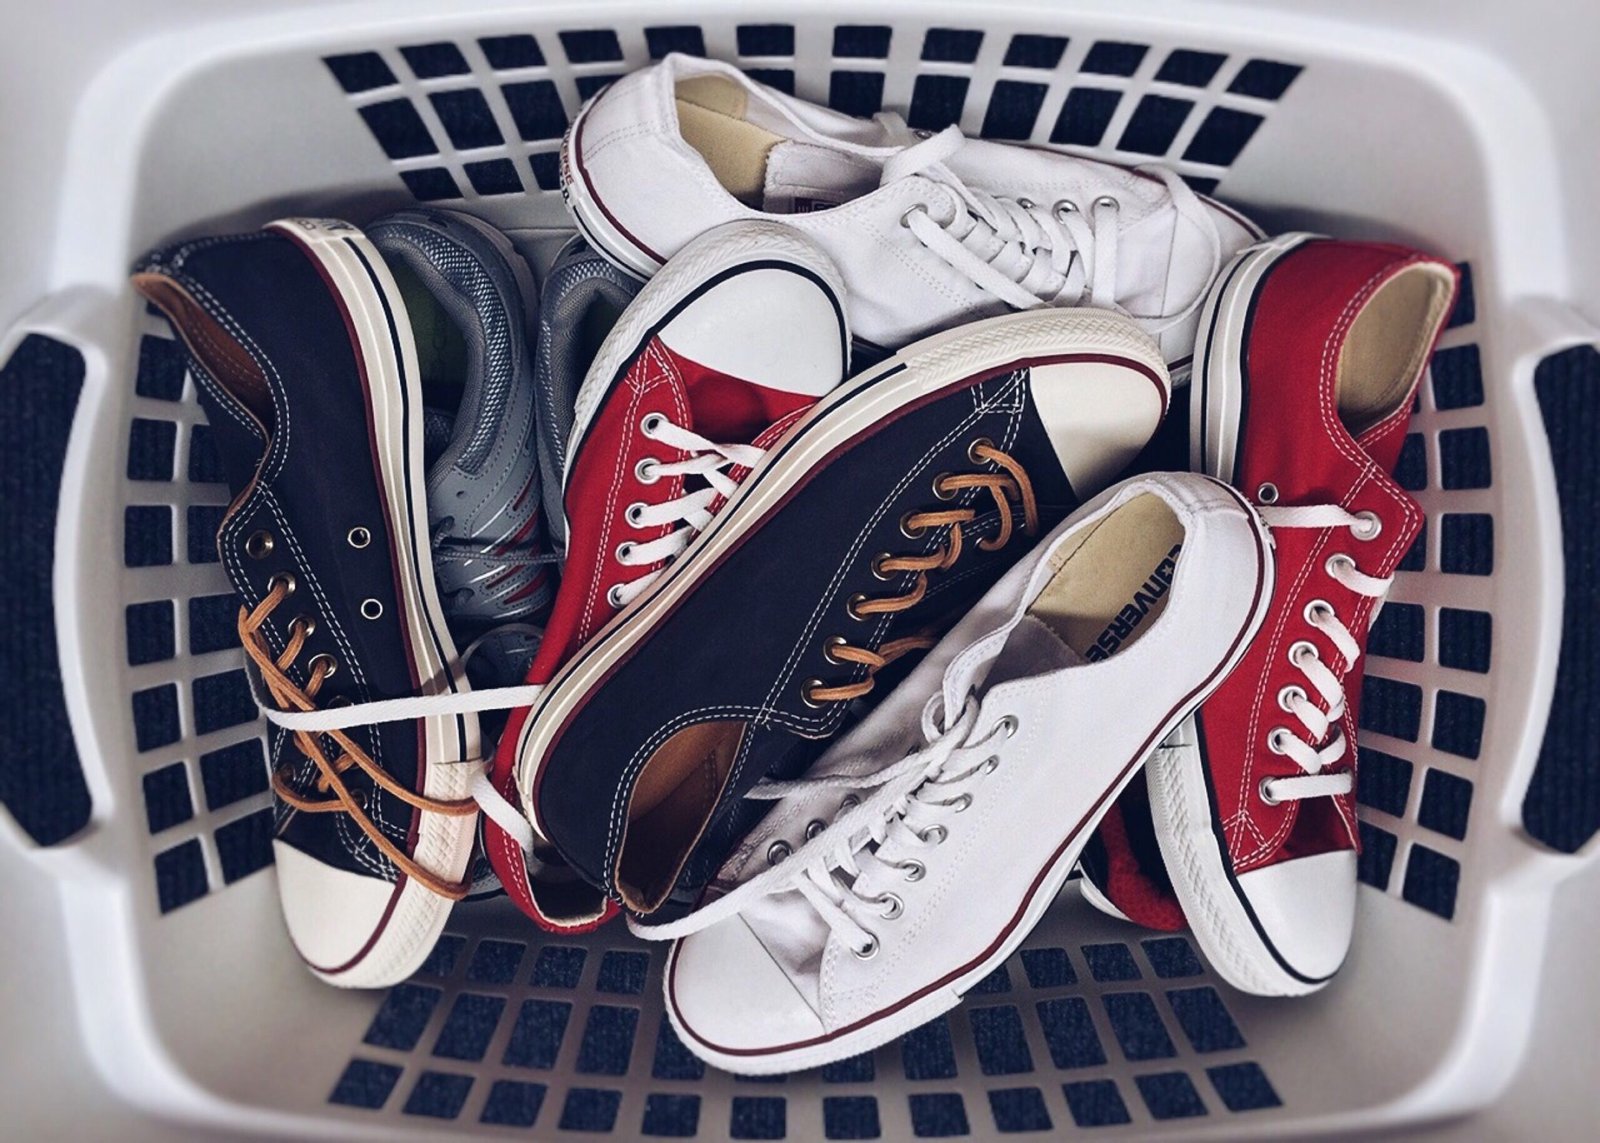 How to Wash Converse In Washer